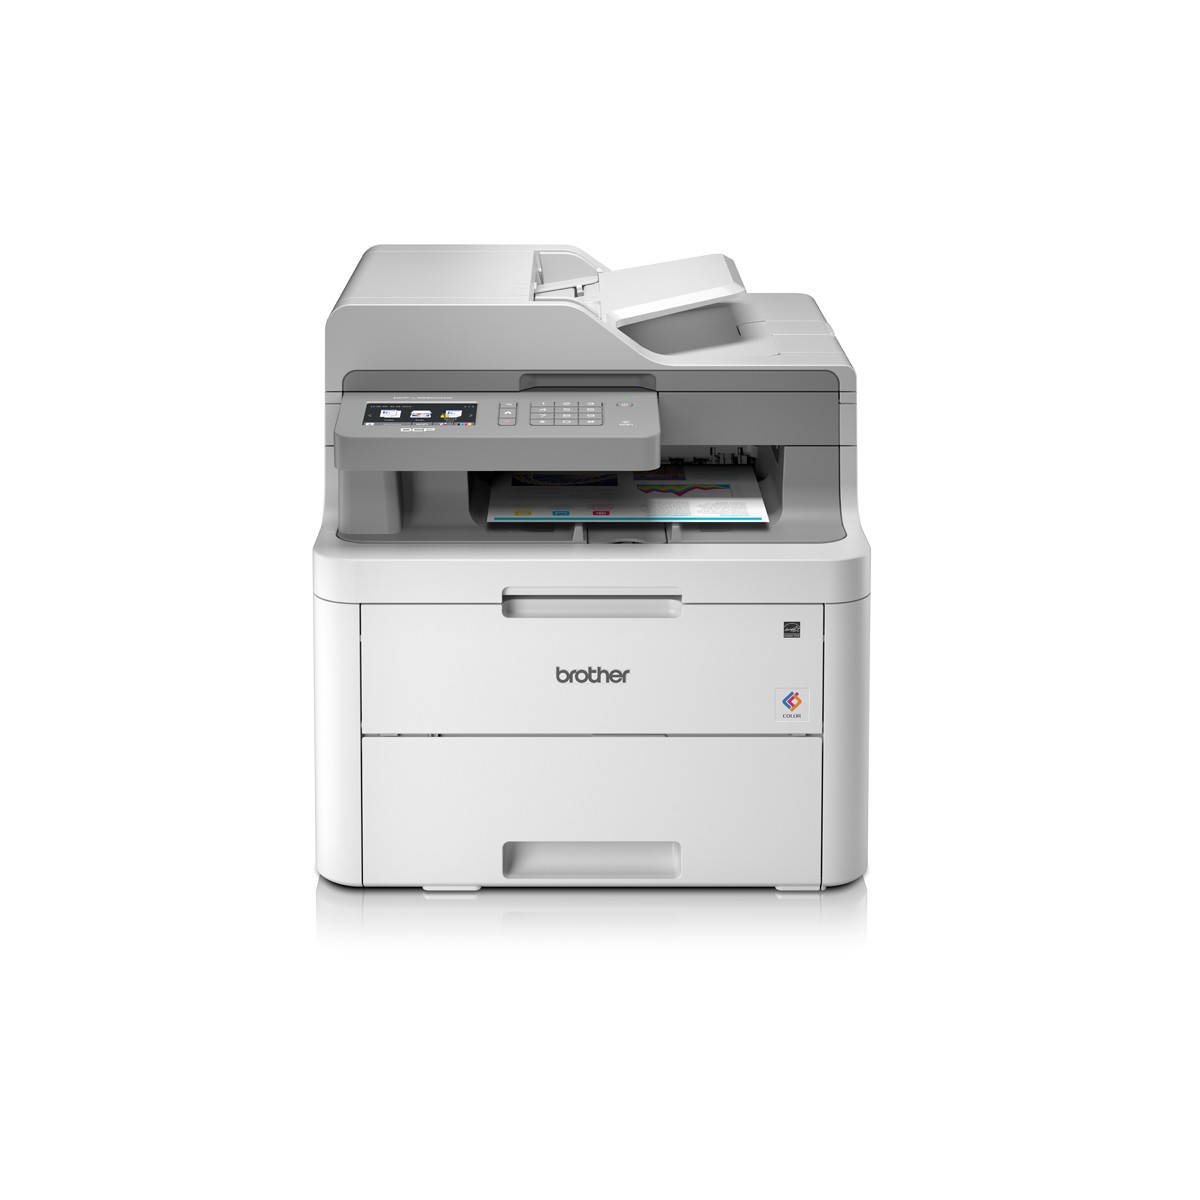 Brother LED Printer. Wired Net and WIF 9.3 Colour - Printer - Colored